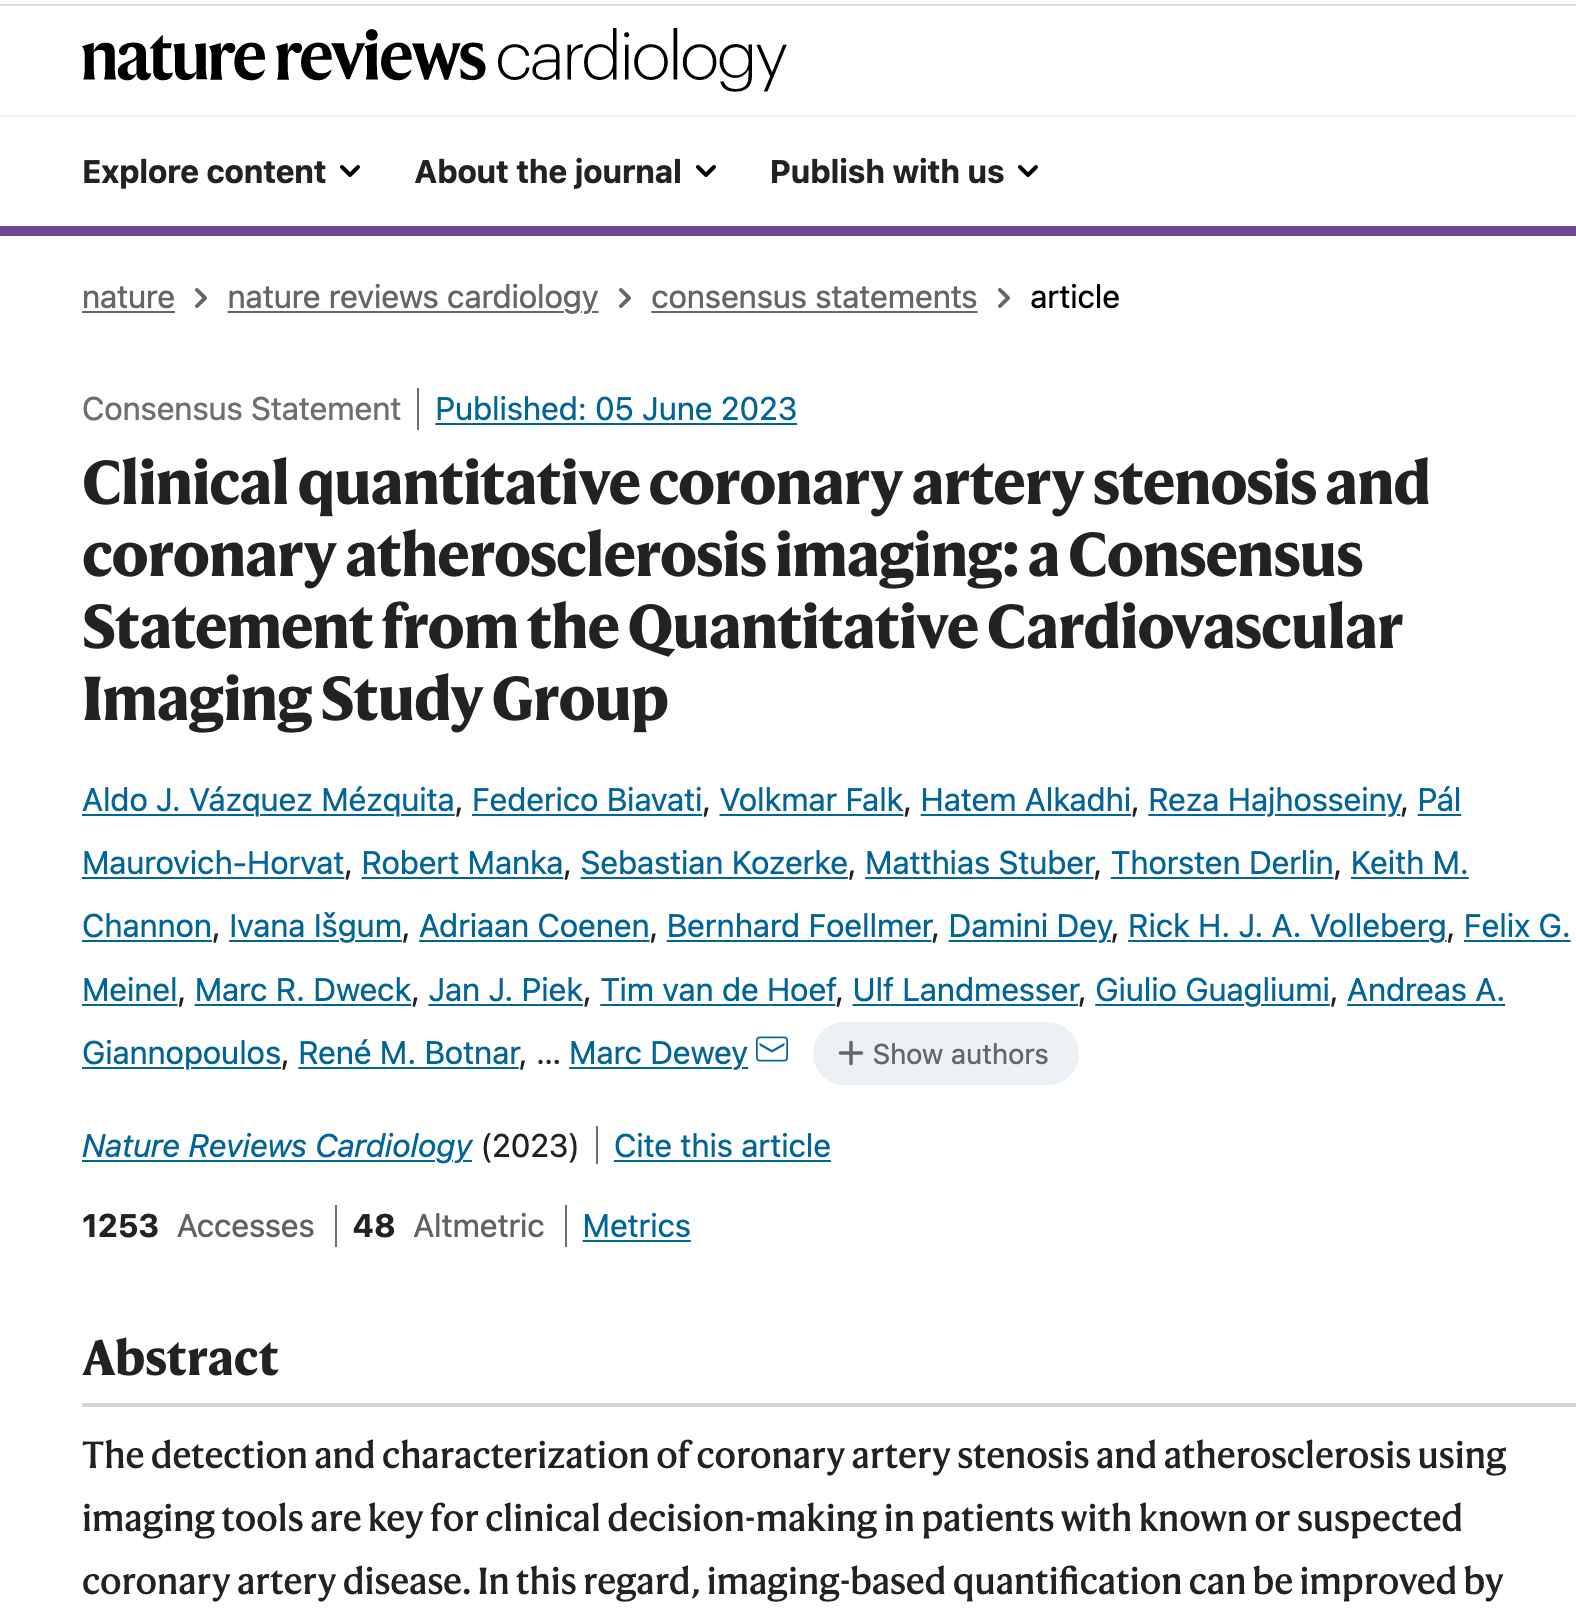 Article in Nature Reviews Cardiology Publication